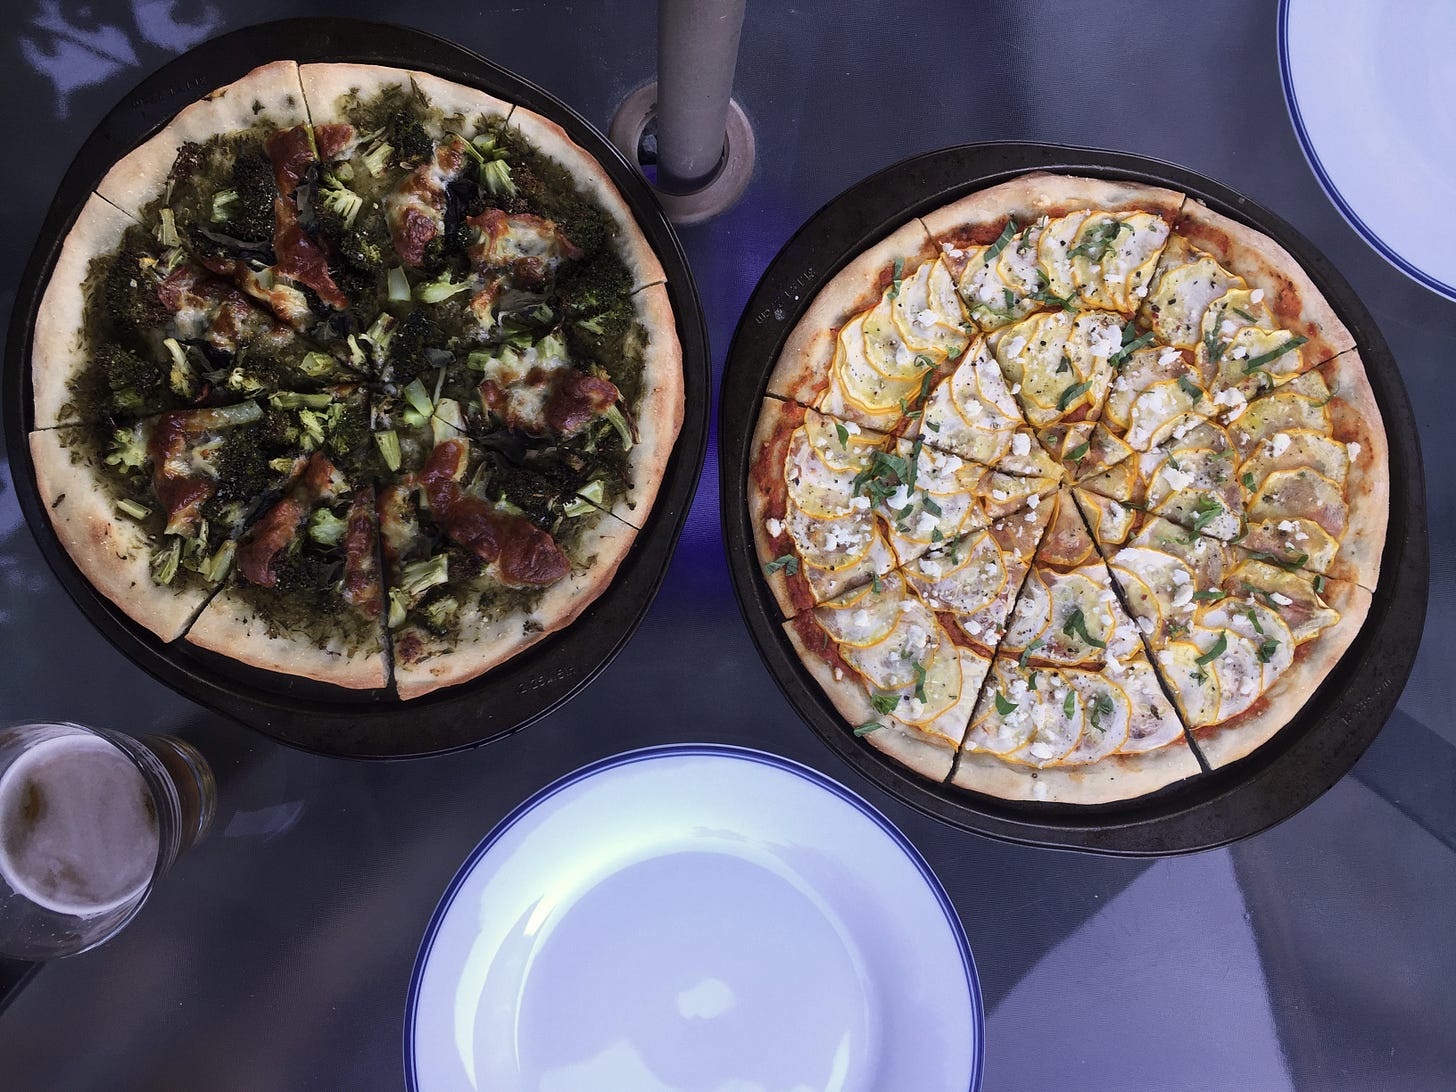 two pizzas in their pans. On the left, a green garlic scape pesto with pieces of broccoli and browned patches of provolone. on the right, a red romesco base with concentric circles of overlapping yellow zucchini, and a dusting of feta and basil.